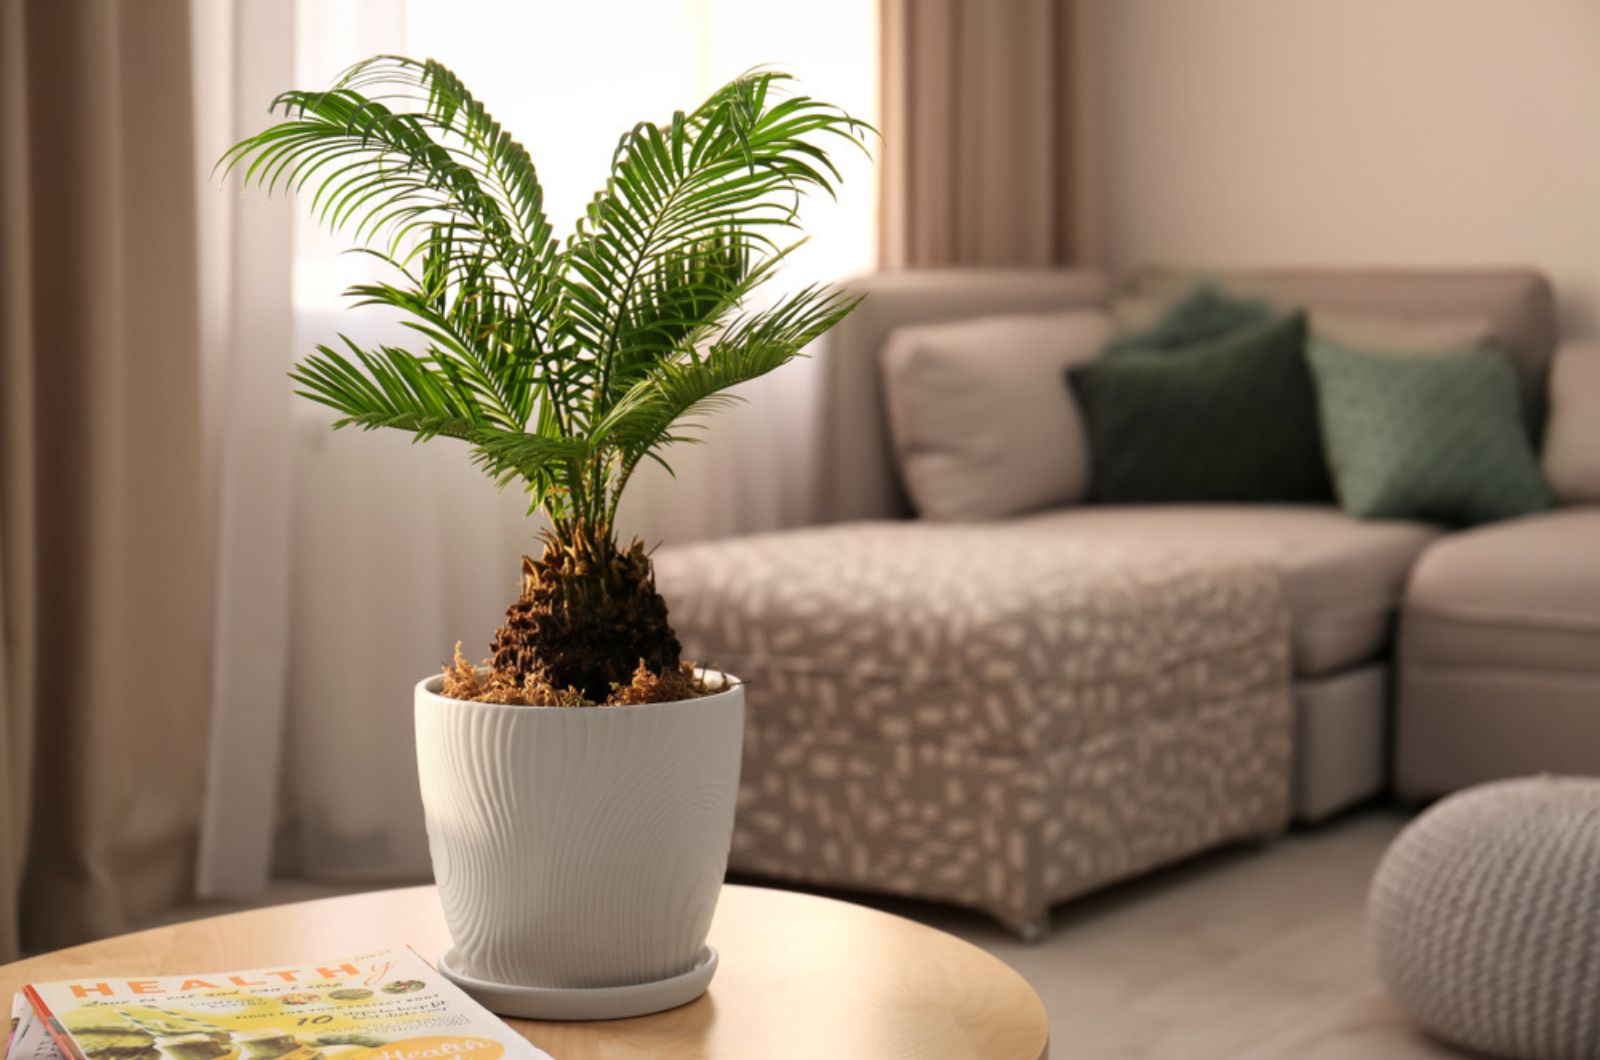 Sago Palm in a pot on the table